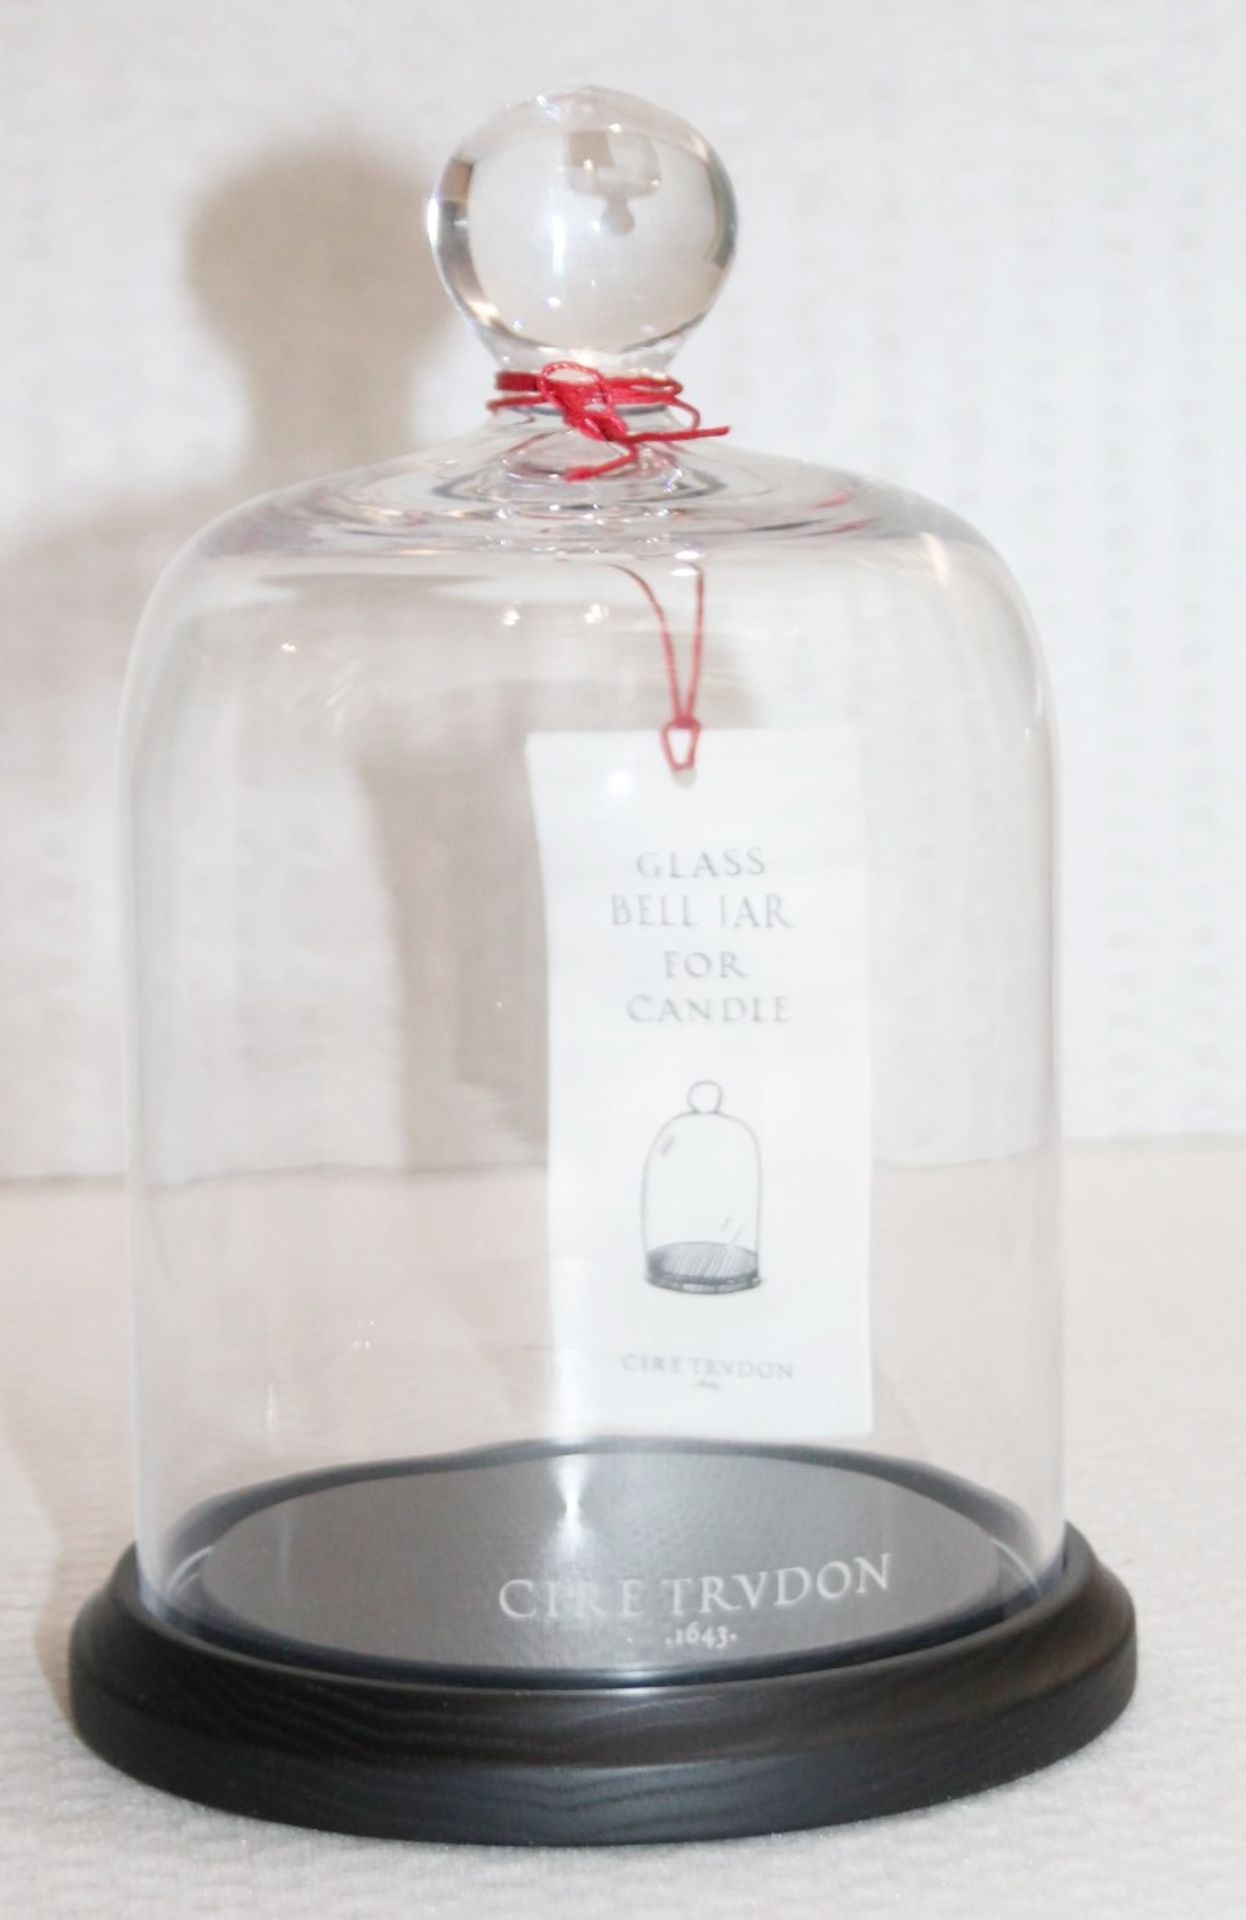 1 x TRUDON Luxury Glass Bell Jar / Candle Cloche - Original Price £80.00 - Unused Boxed Stock - Image 3 of 9